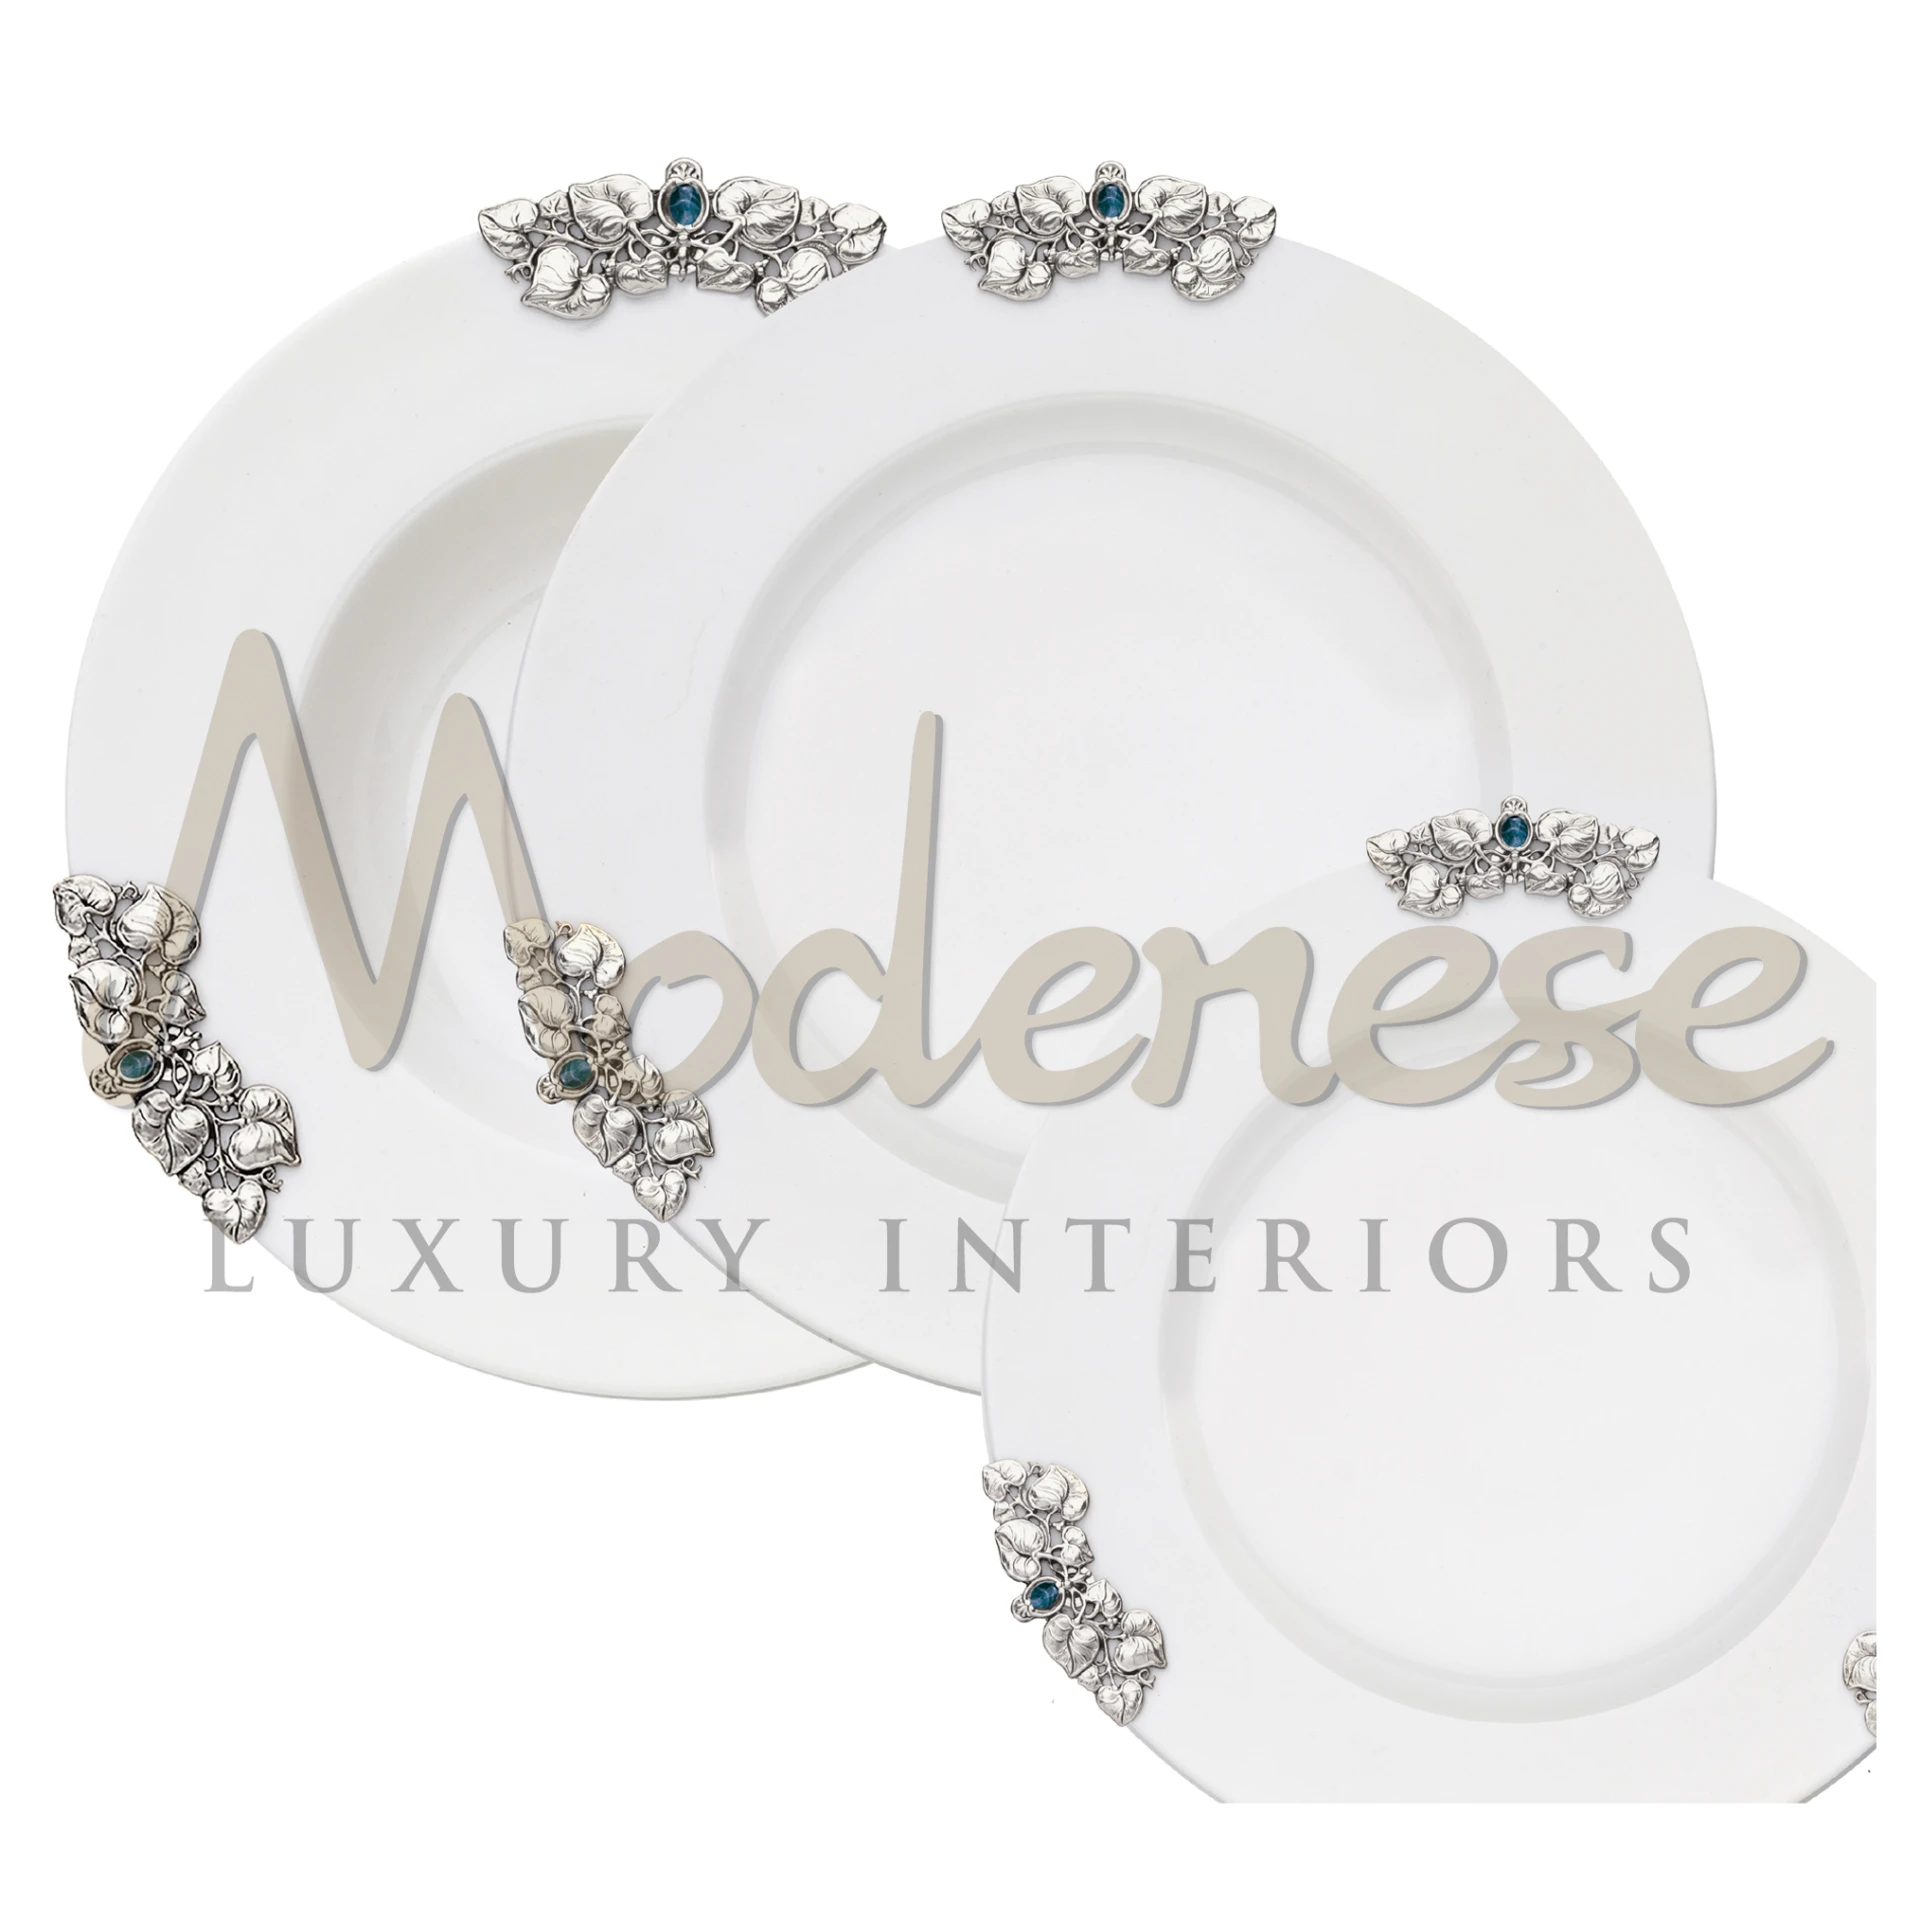 The Bronze Silver & Stone plate set with white plates and silver floral accents featuring blue gemstones.